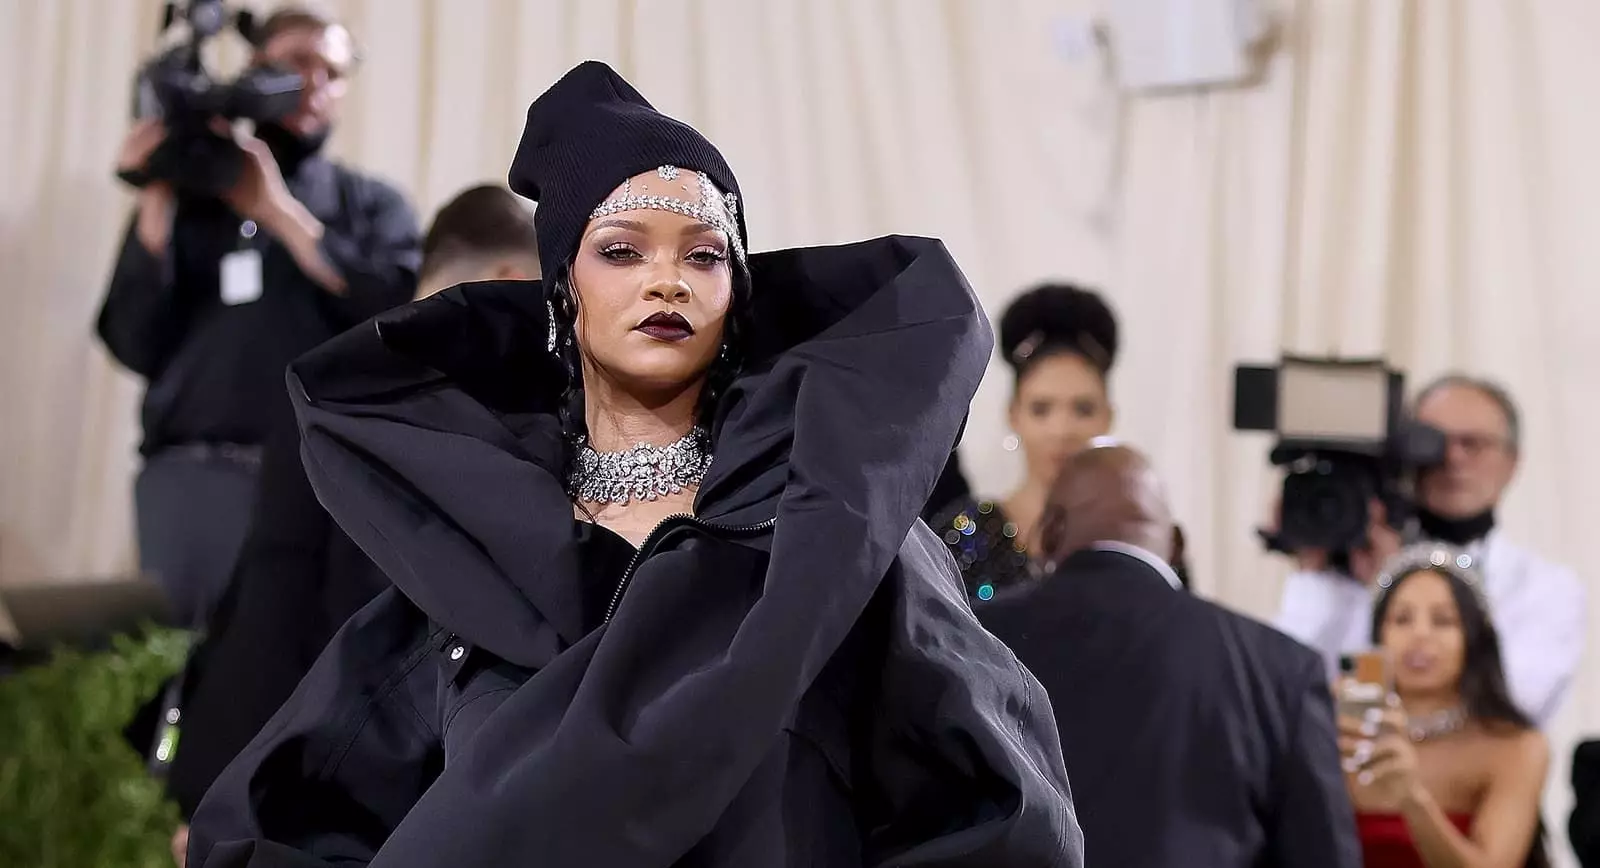 Rihanna at the Met Gala 2021 wearing over 267 carats of diamonds with Bulgari High Jewellery and archival designs